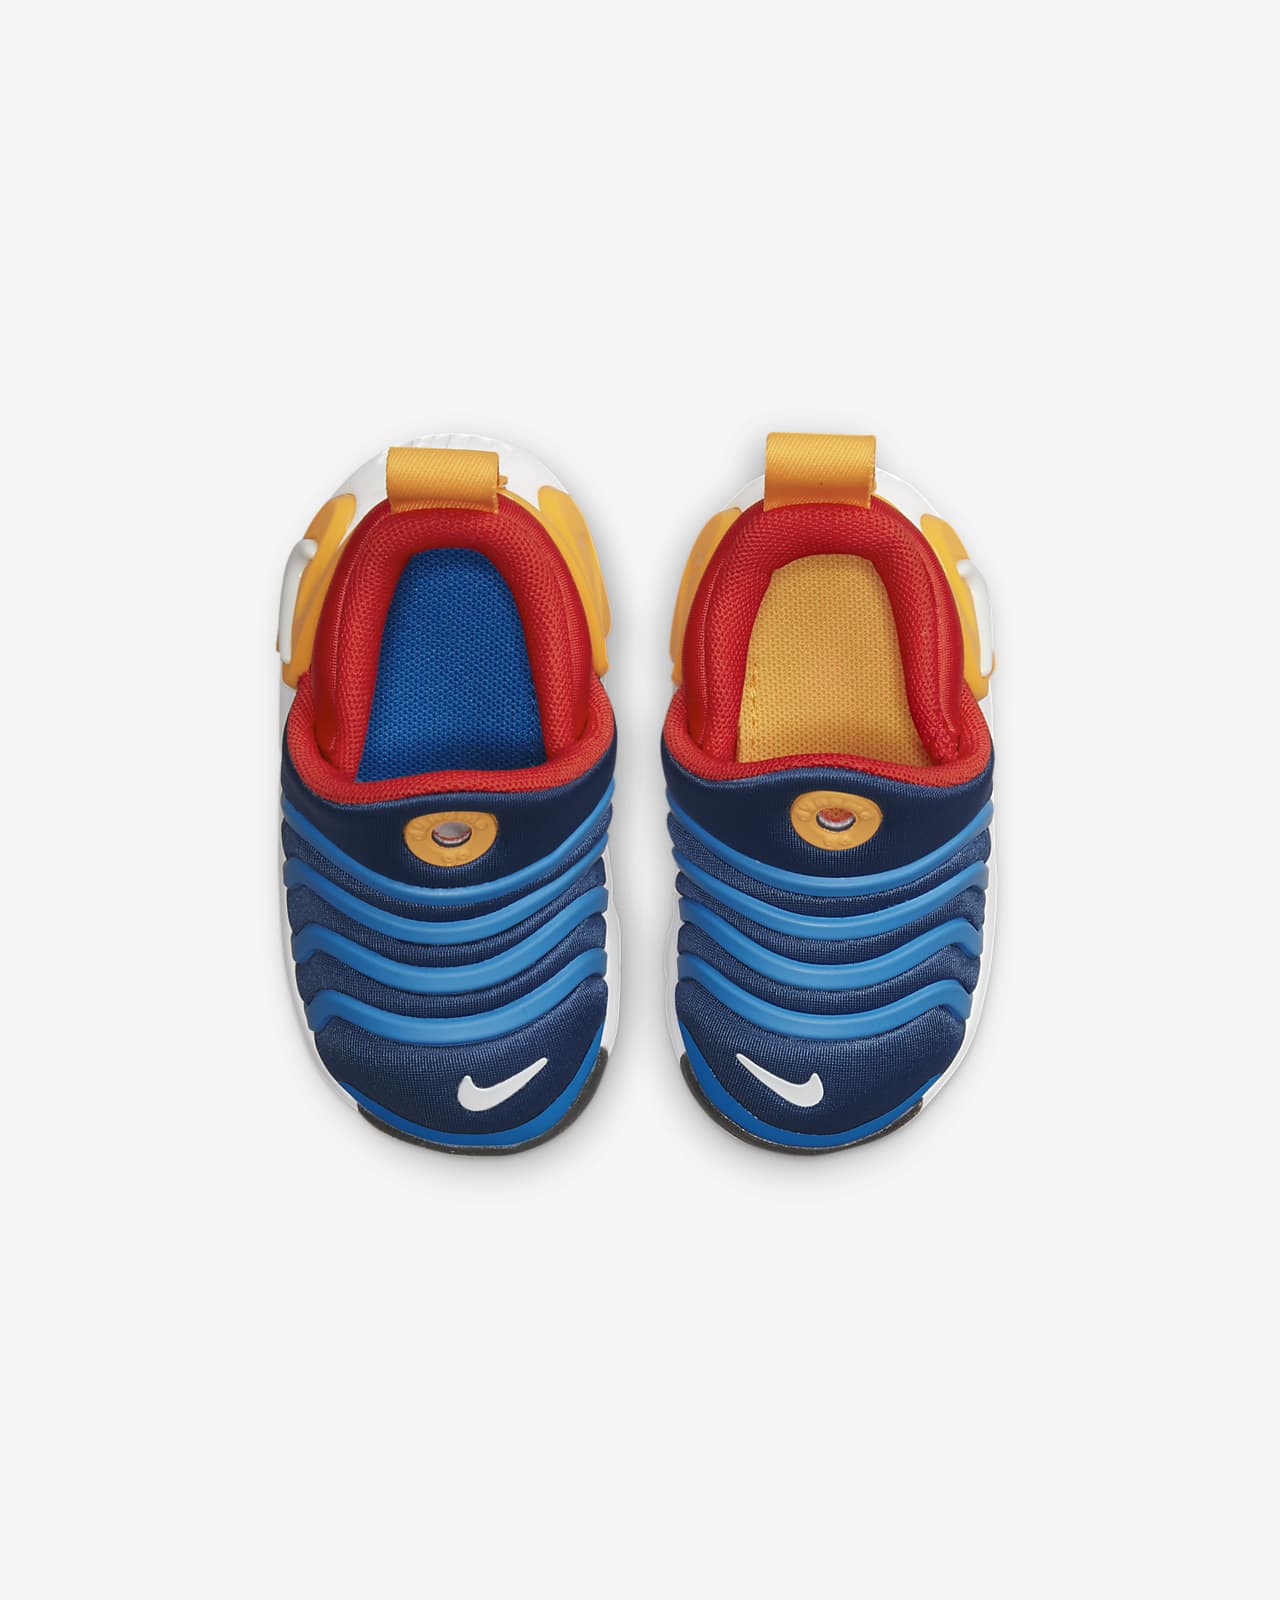 Nike Dynamo Go Baby/Toddler Easy On/Off Shoes